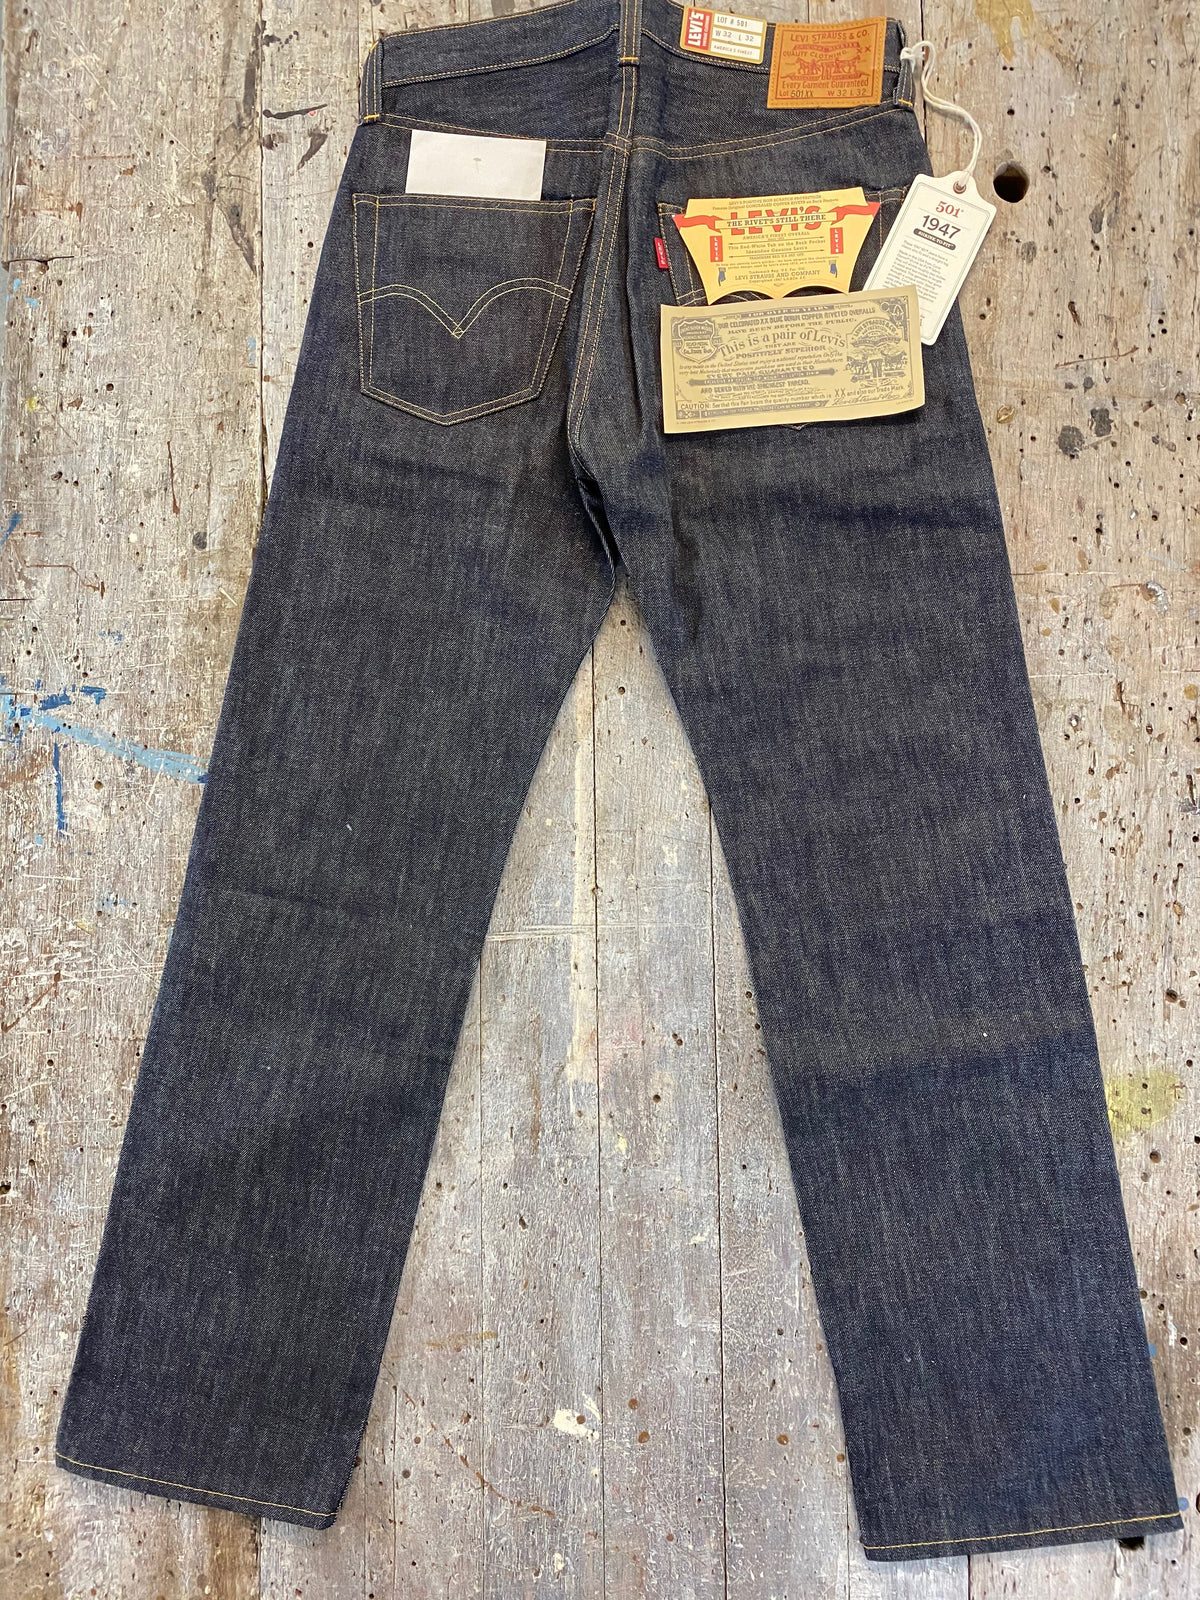 LEVIS VINTAGE CLOTHING 1947 501 RAW SHRINK TO FIT